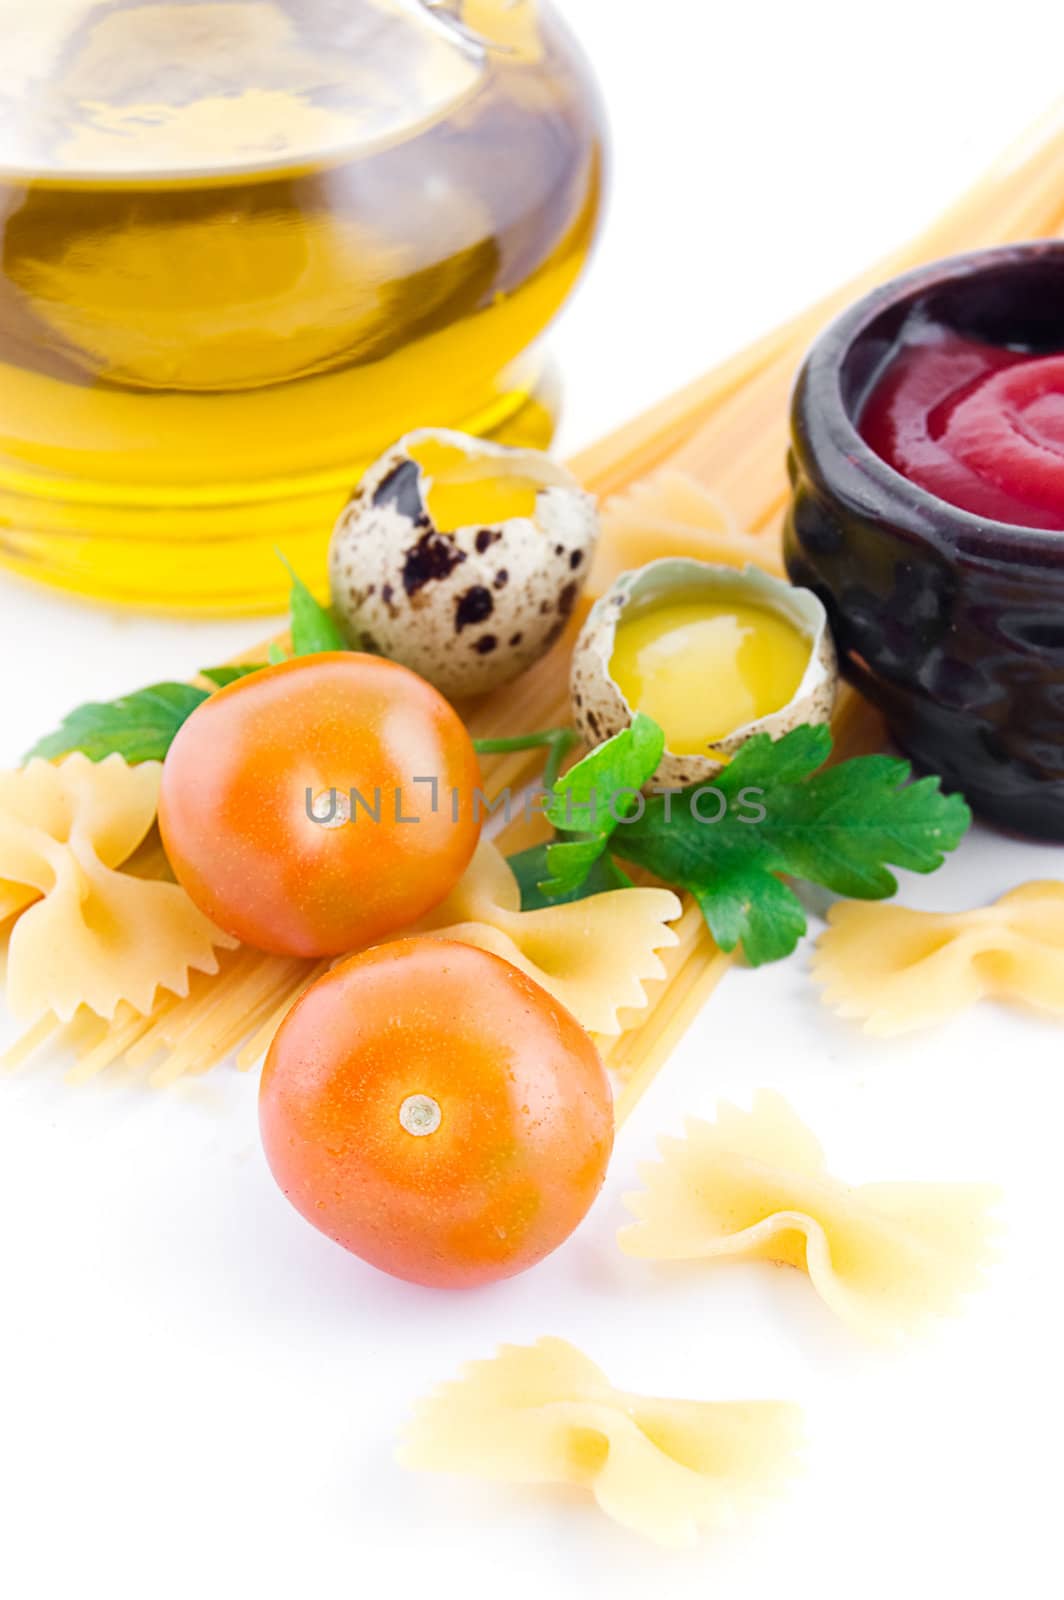 Pasta ingredients with cherry tomato, ketchup, greens and eggs